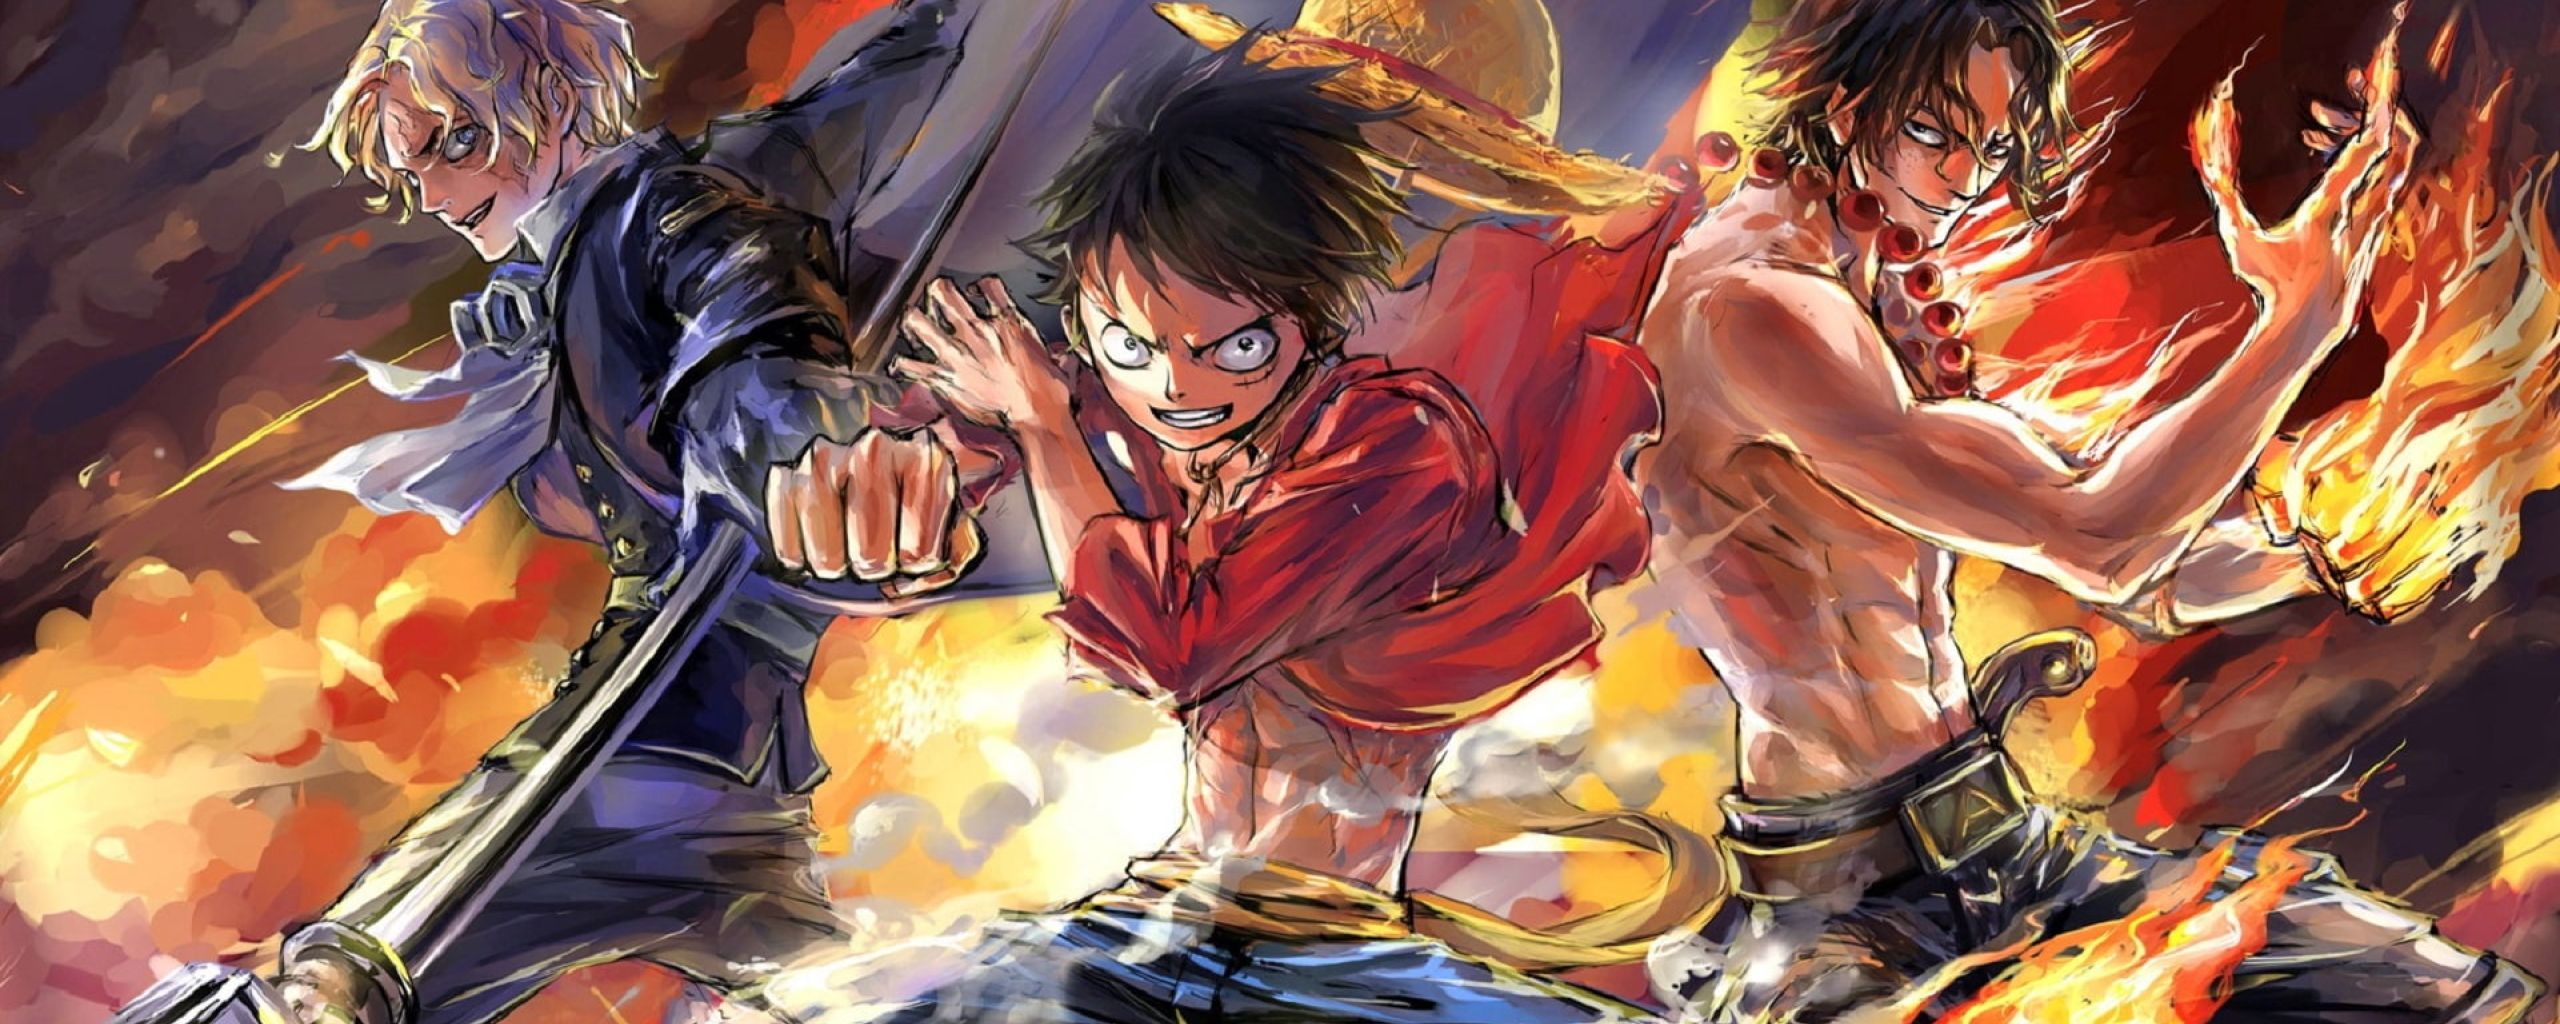 Luffy, Ace and Sabo One Piece Team 2560x1024 Resolution Wallpaper, HD Anime 4K Wallpaper, Image, Photo and Background